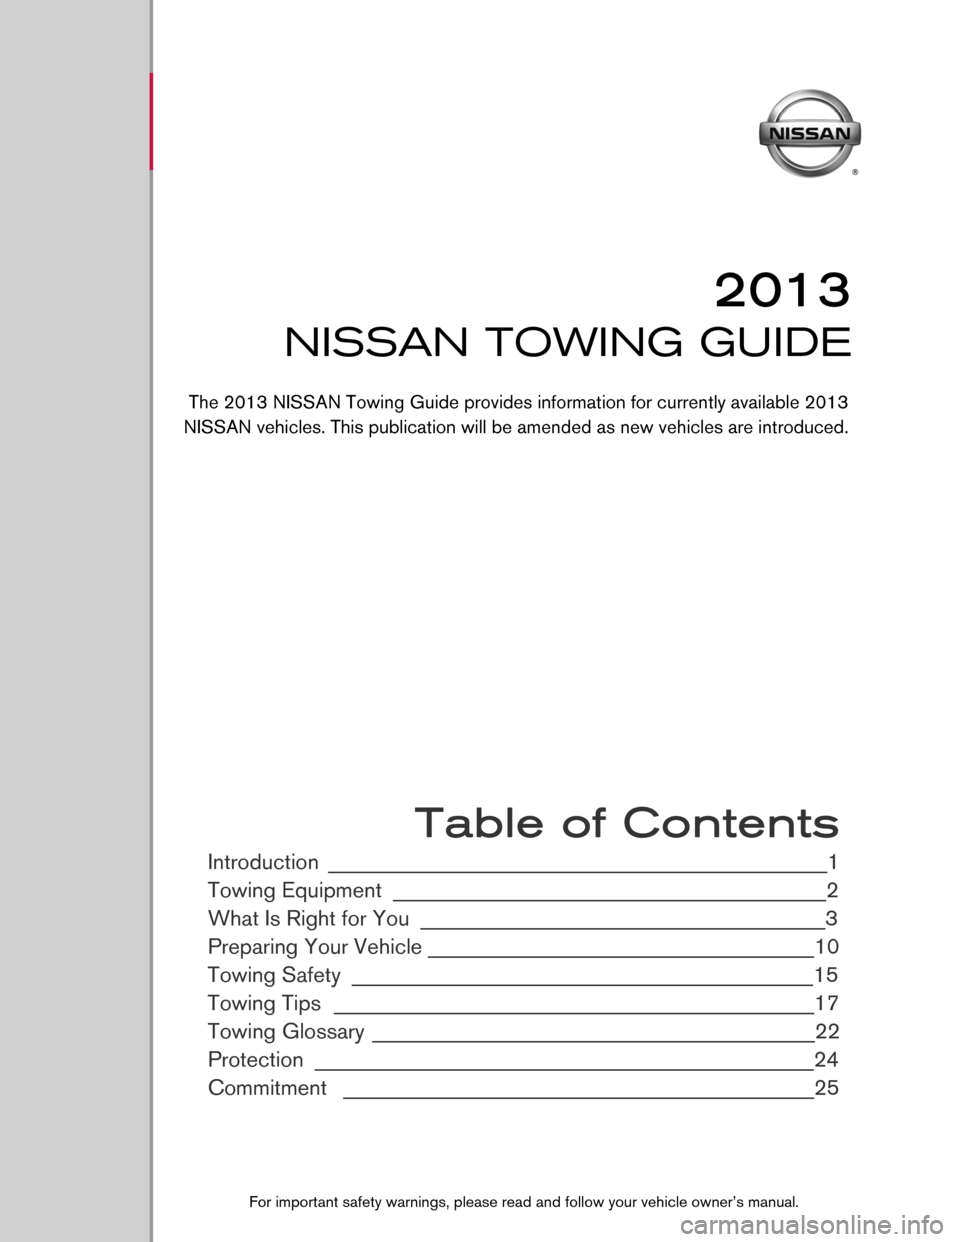 NISSAN XTERRA 2013 N50 / 2.G Towing Guide 9
2013
NISSAN TOWING GUIDE
 Table of Contents
Introduction _____________________________________________________1 
Towing Equipment
 ______________________________________________2 
What Is Right for 